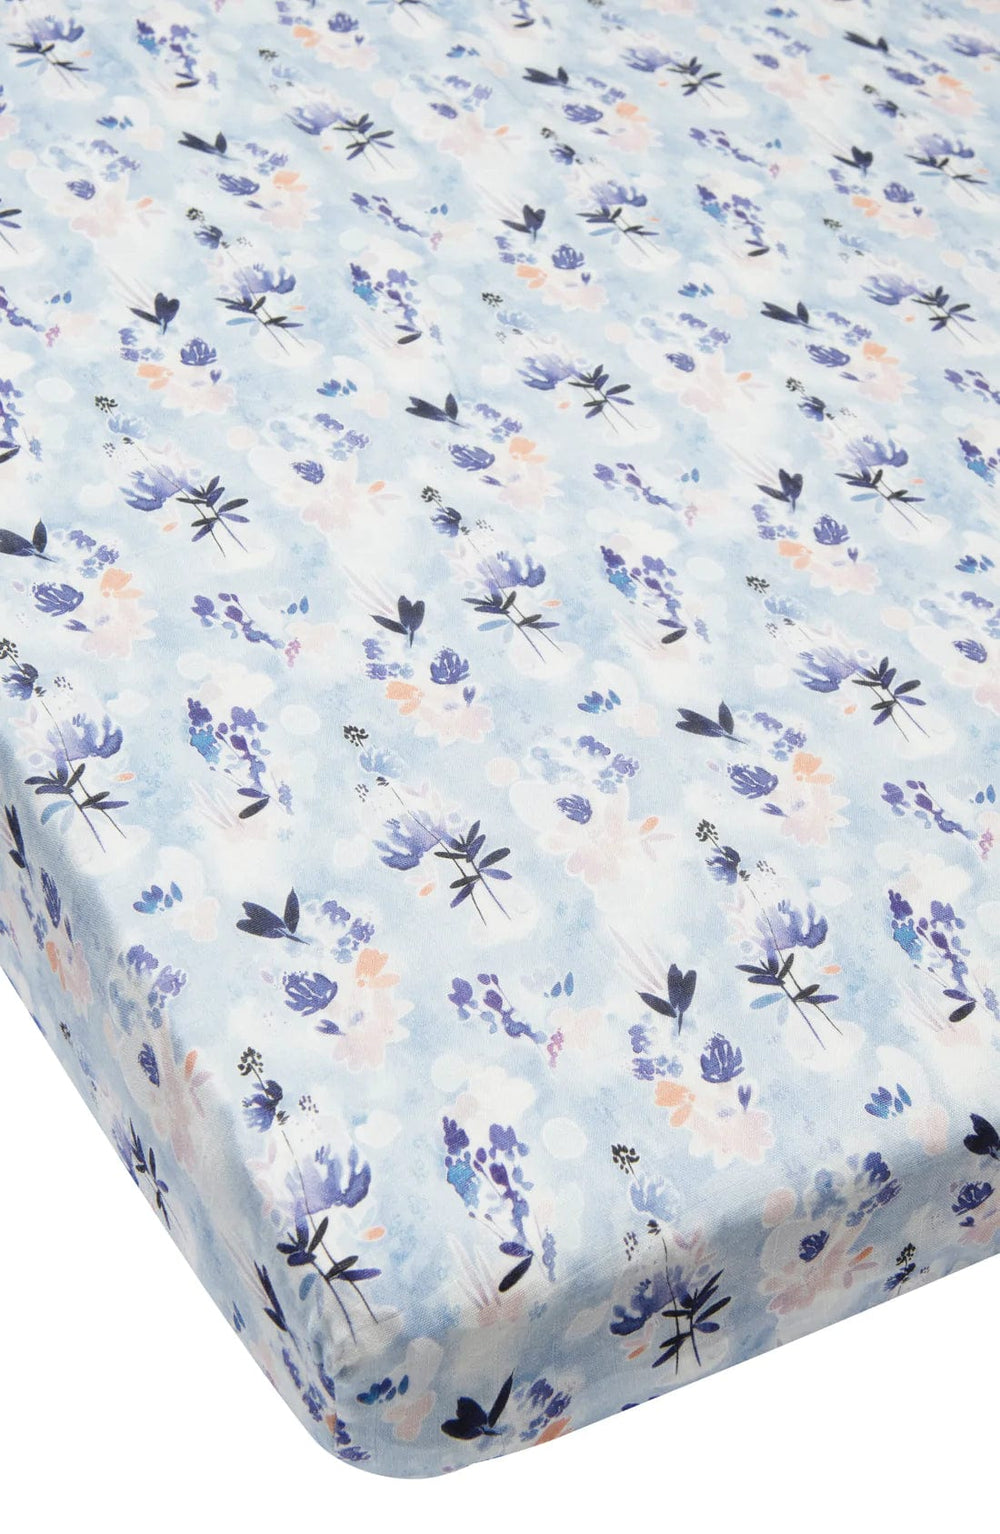 Fitted Crib Sheet - Ink Floral LouLou Lollipop Lil Tulips